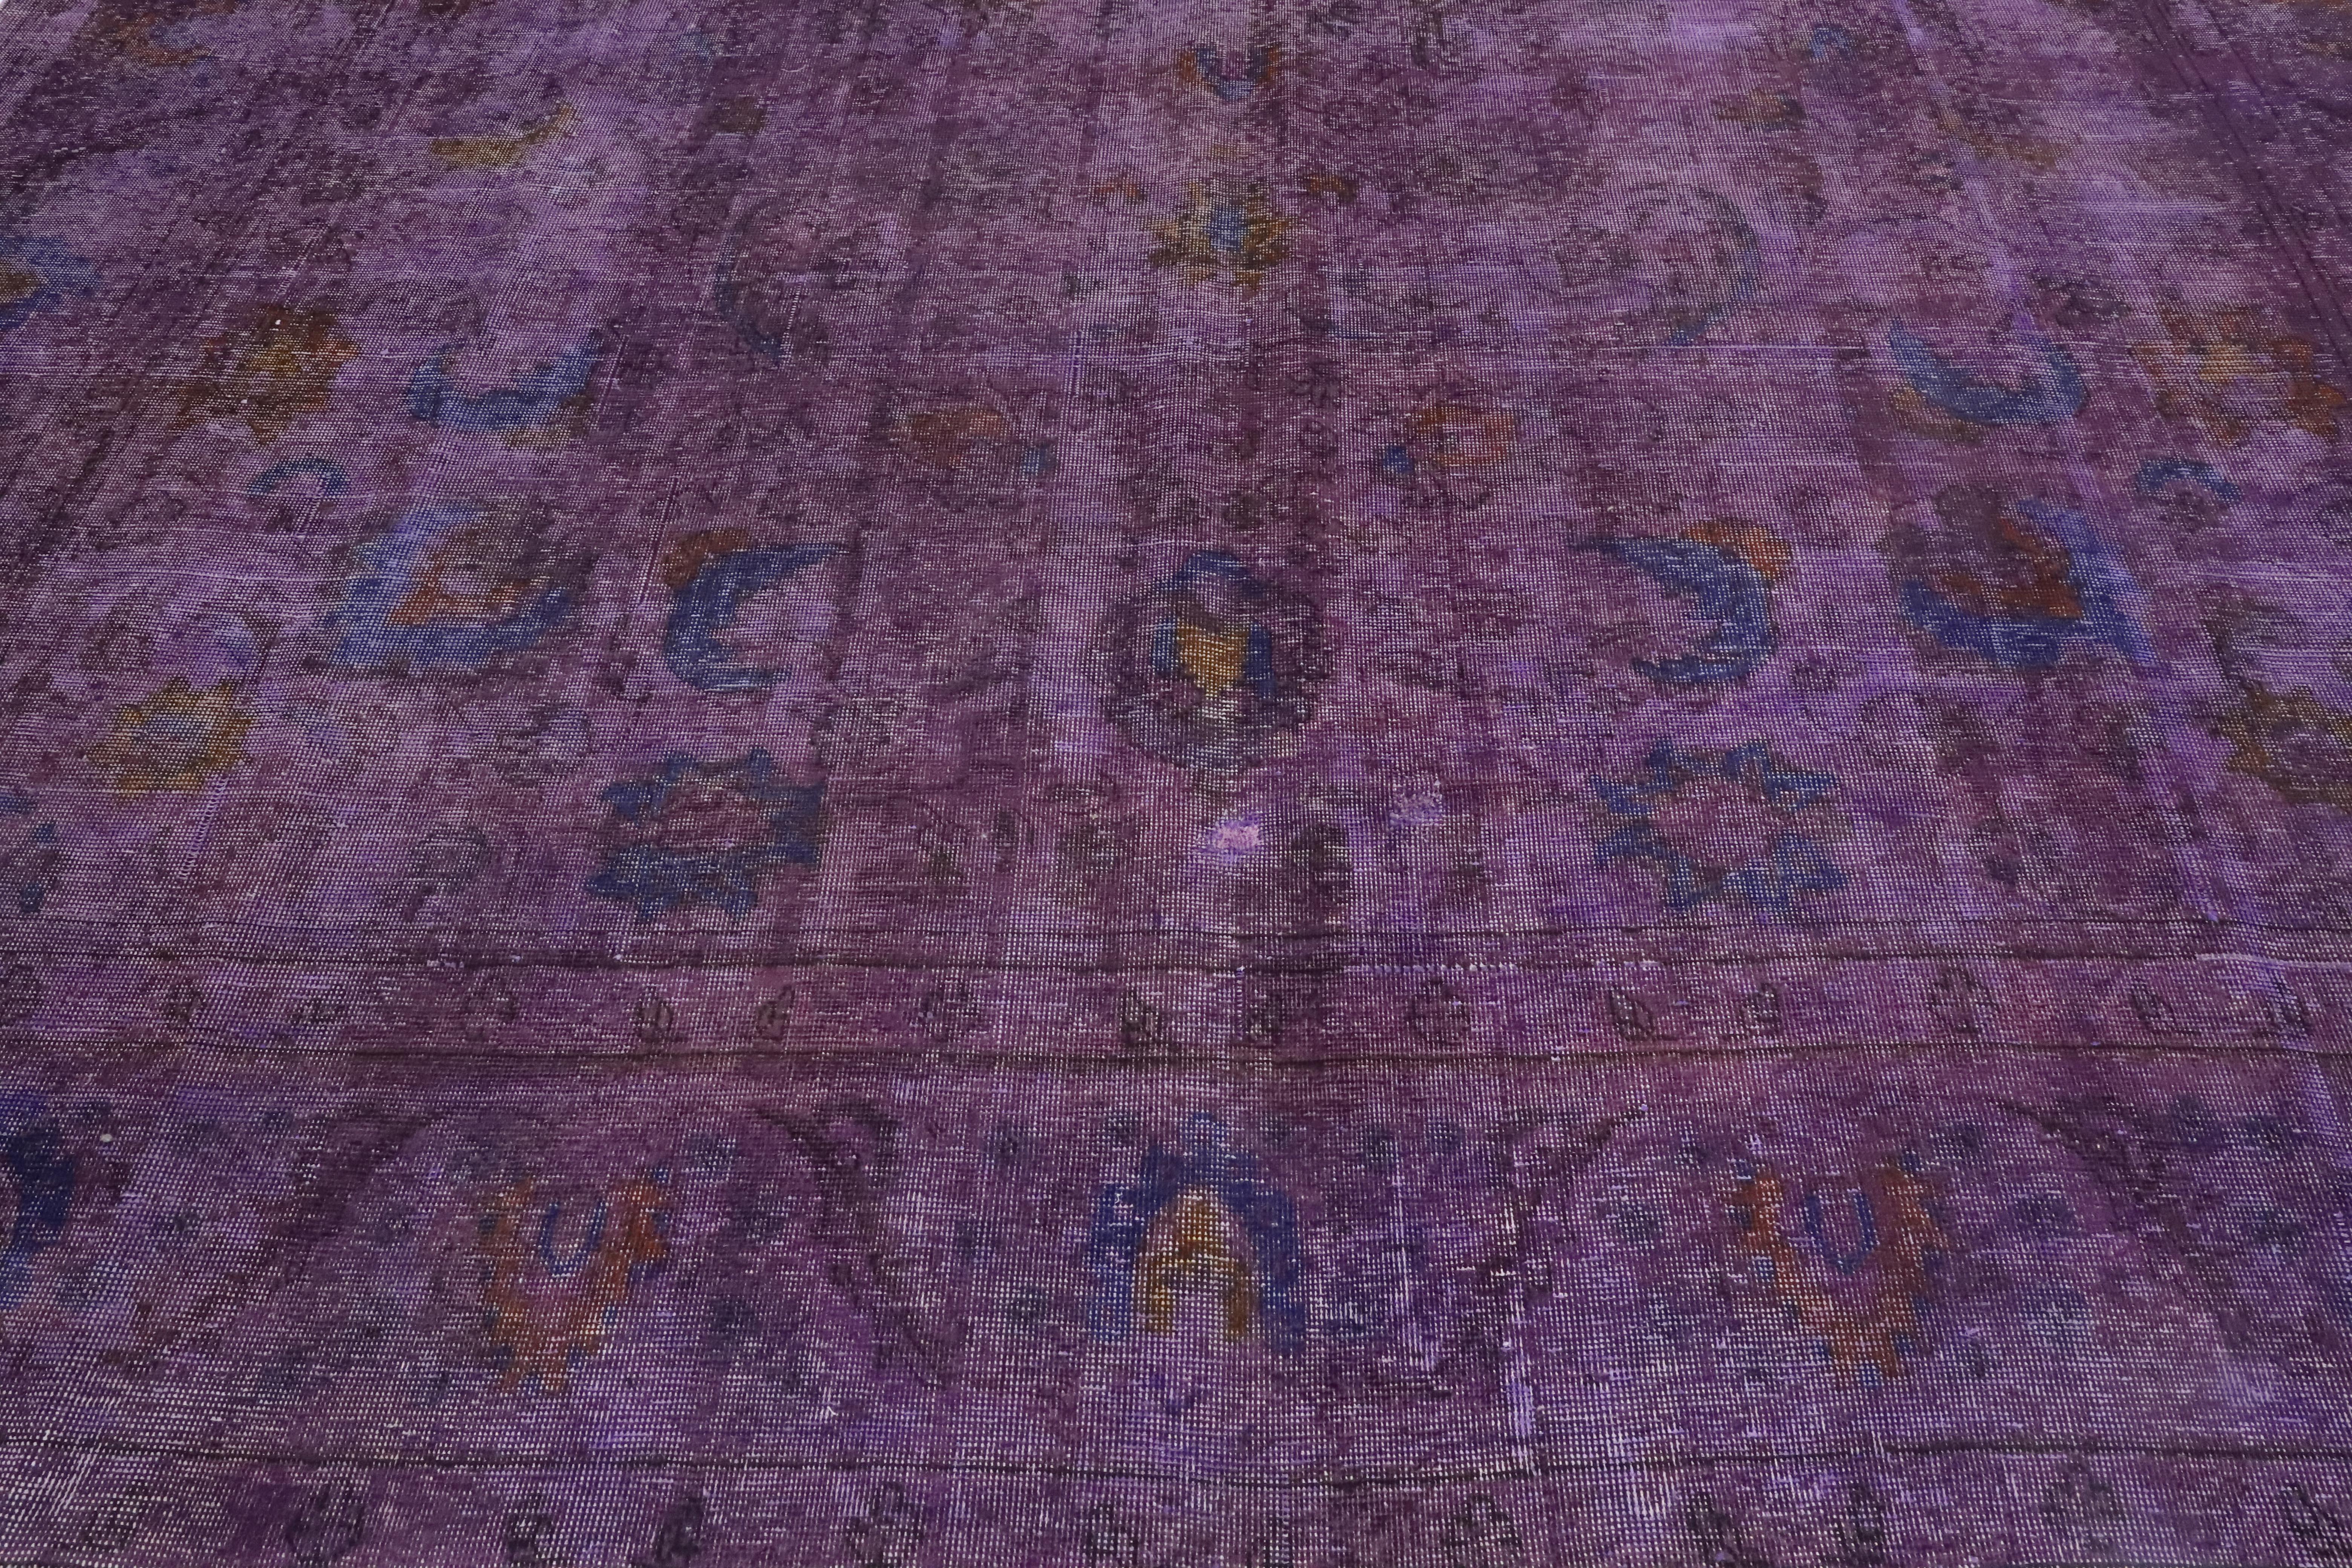 Distressed Overdyed Purple Persian Rug with PostModern Memphis Style 1